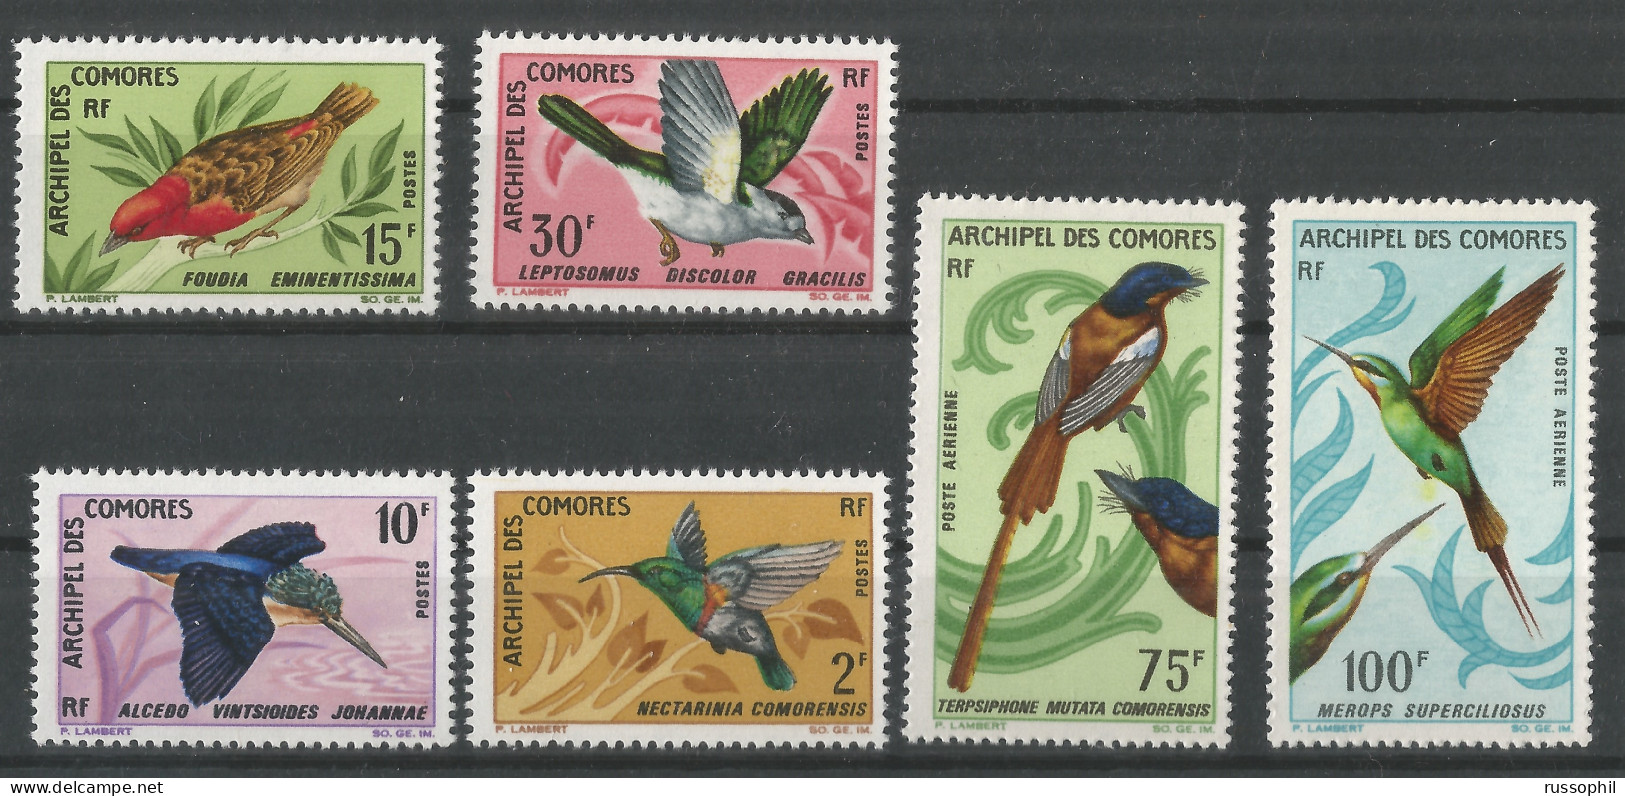 COMORES - OISEAUX - BIRDS -  Yv. #41 TO Yv. #44 AND Yv. #PA20 AND Yv. #PA21 -  (**/MNH) - 1967 - Unused Stamps